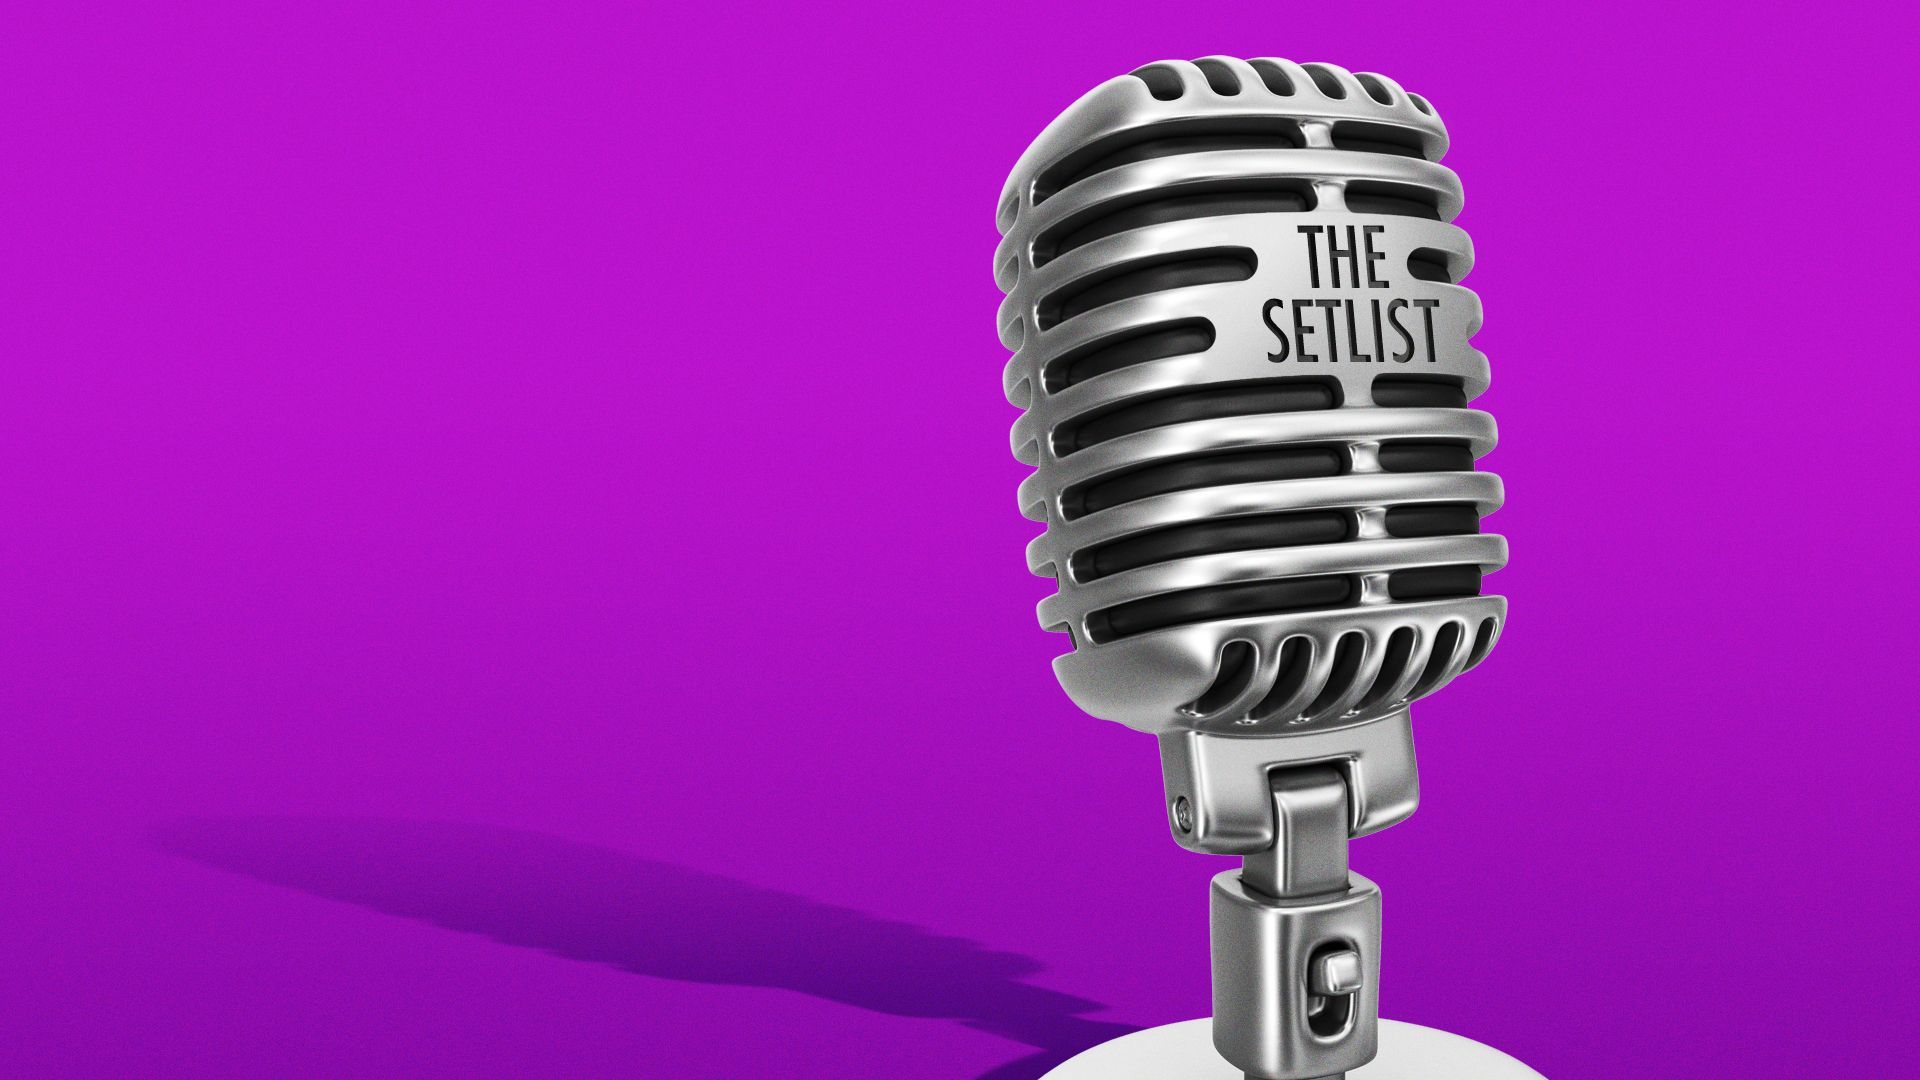 Illustration of a retro microphone. Some of the slits have been replaced with "The Setlist."